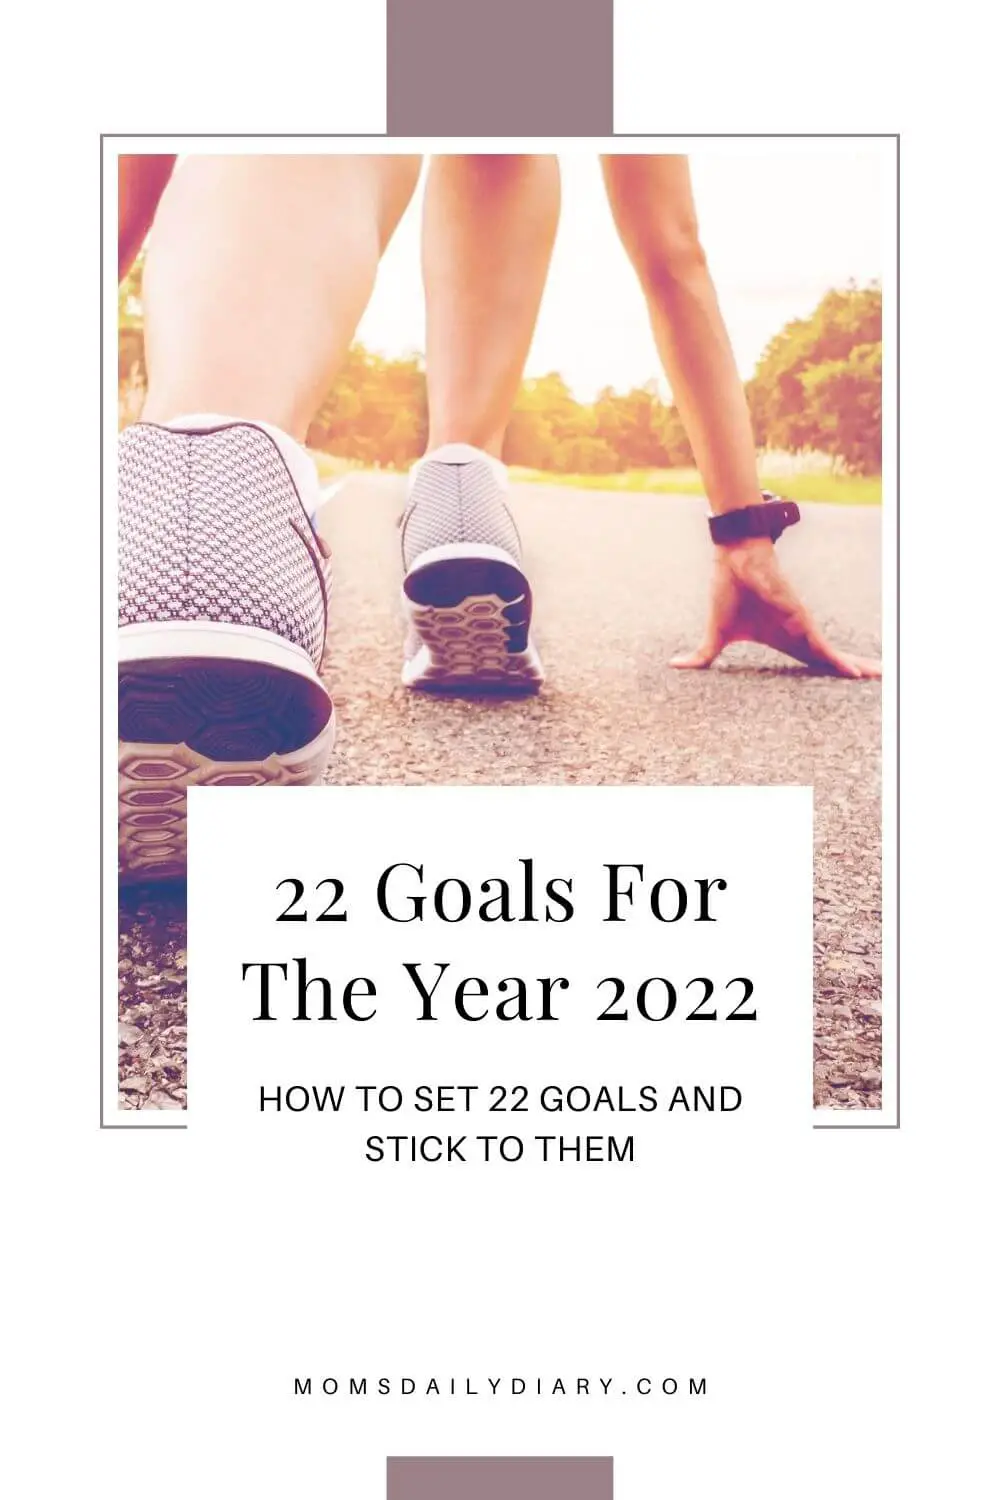 Pinterest pin with text "22 Goals for the Year 2022. How to set 22 goals and stick to them" and image of a runner on the start line.